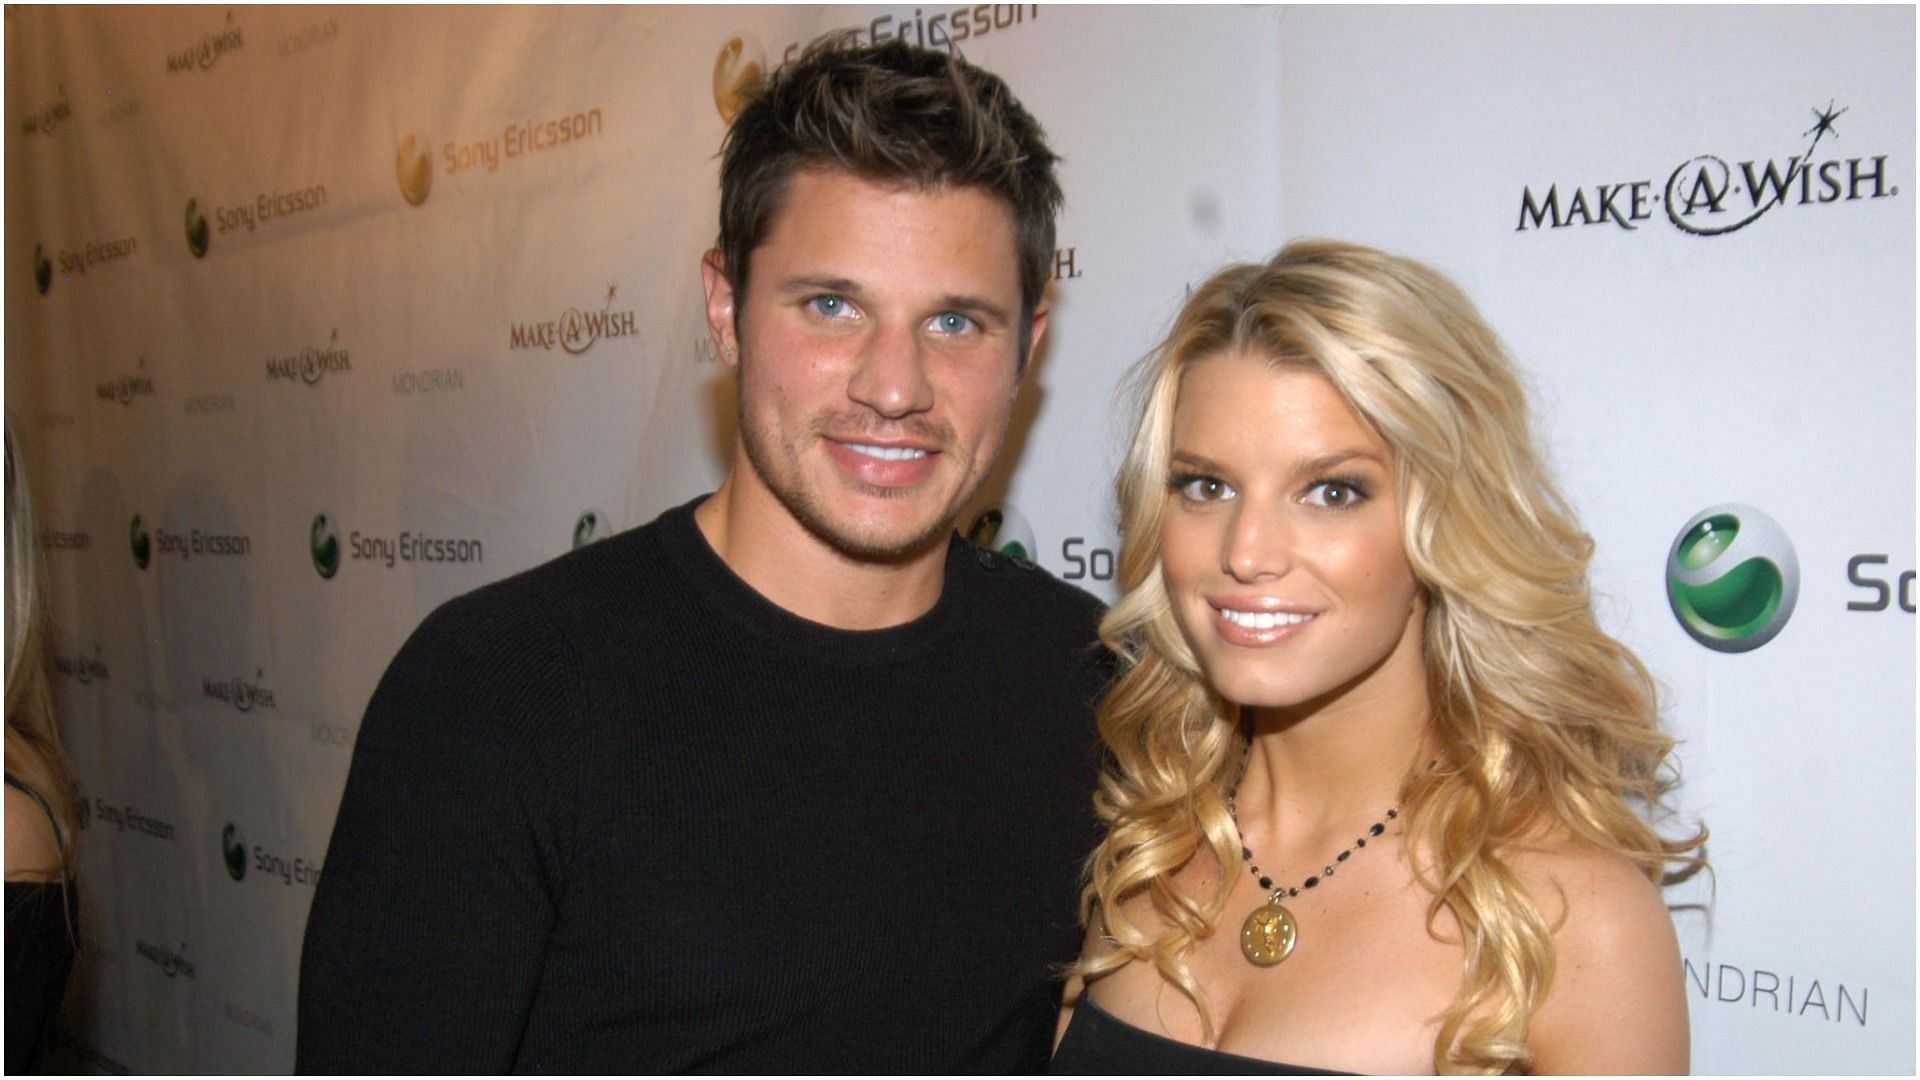 Nick Lachey and Jessica Simpson during Sony Ericsson T610/T616 Shoot for the Stars Charity Auction (Image via Getty Images)